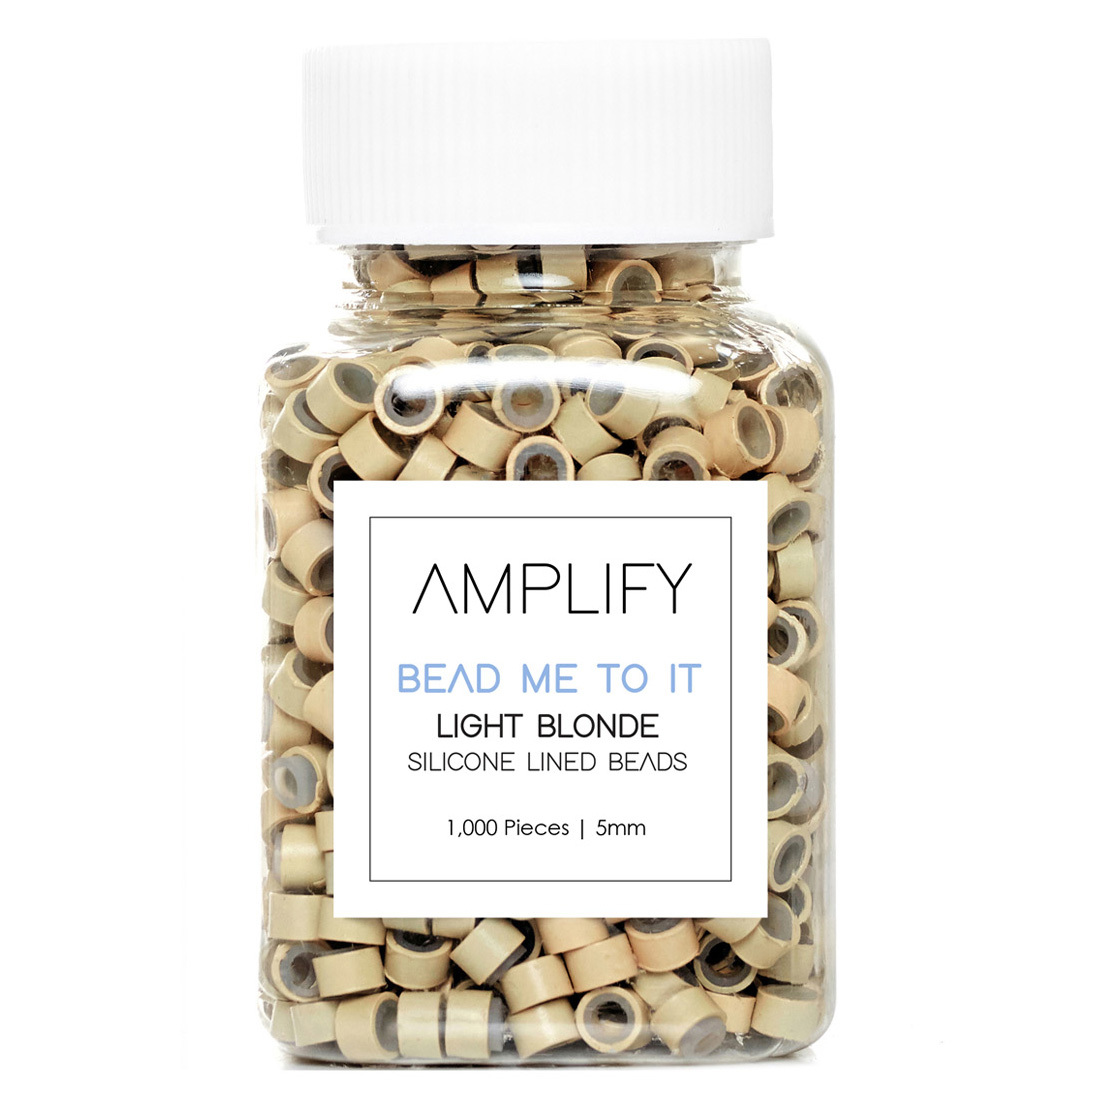 AMPLIFY TOOLS & SUPPLIES: Bead Me To It: Light Blonde 5mm Beads - 1000ct